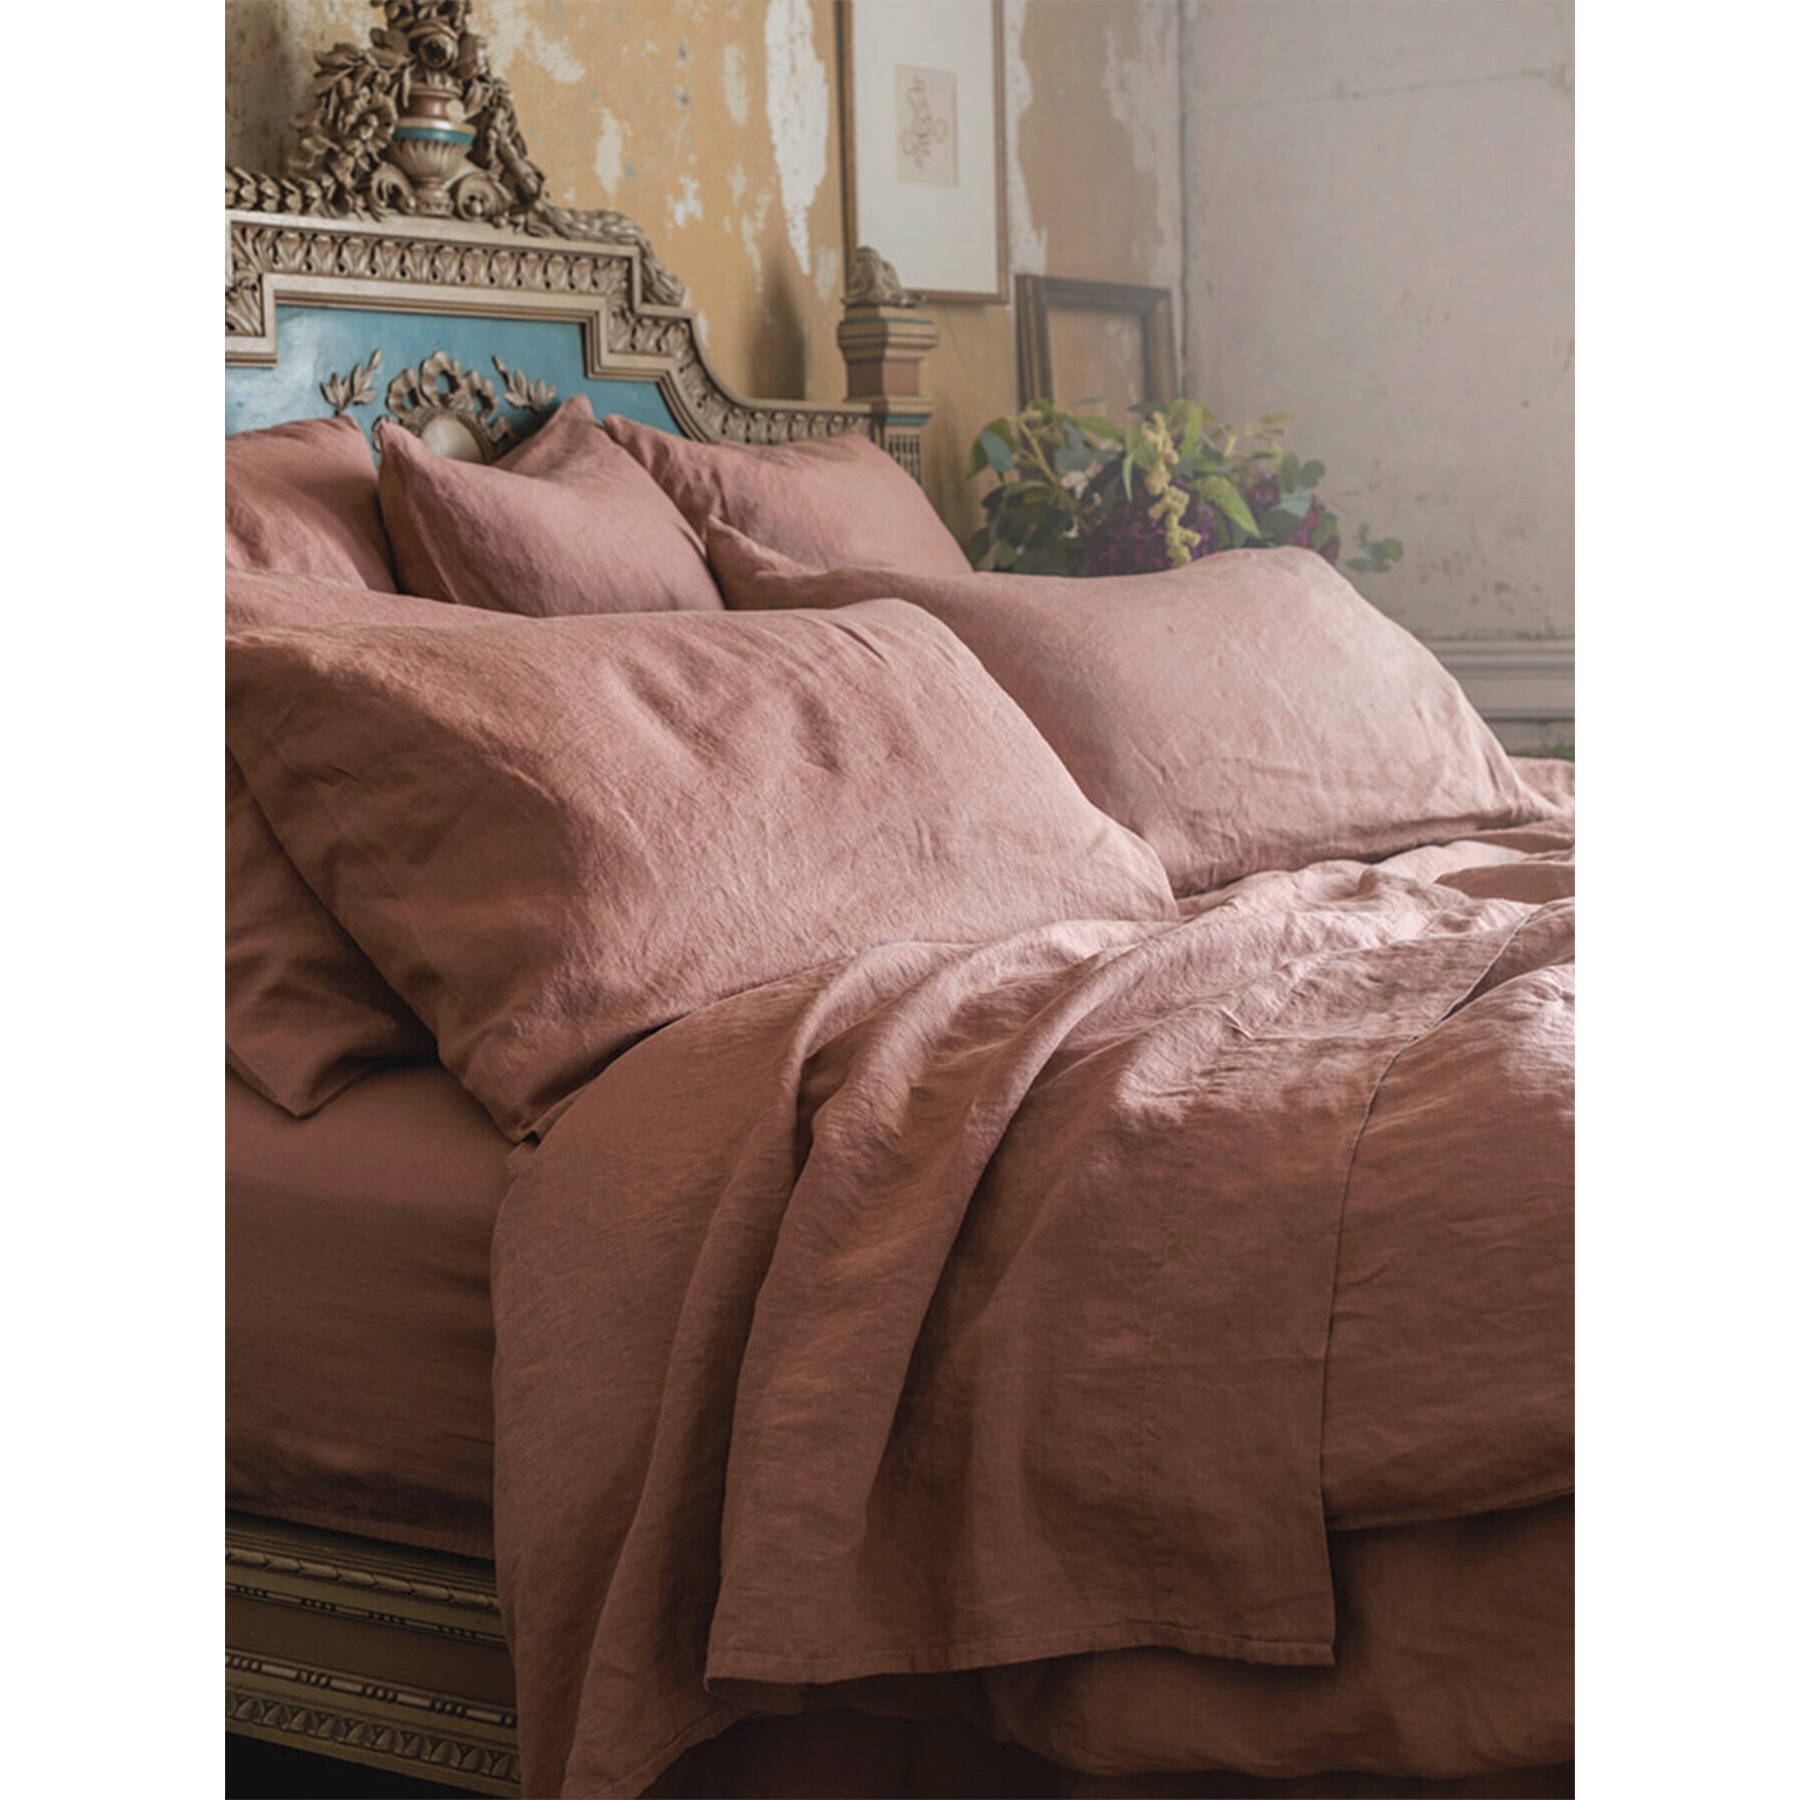 Piglet in Bed Linen Fitted Sheet - Size Single Tan - image 1